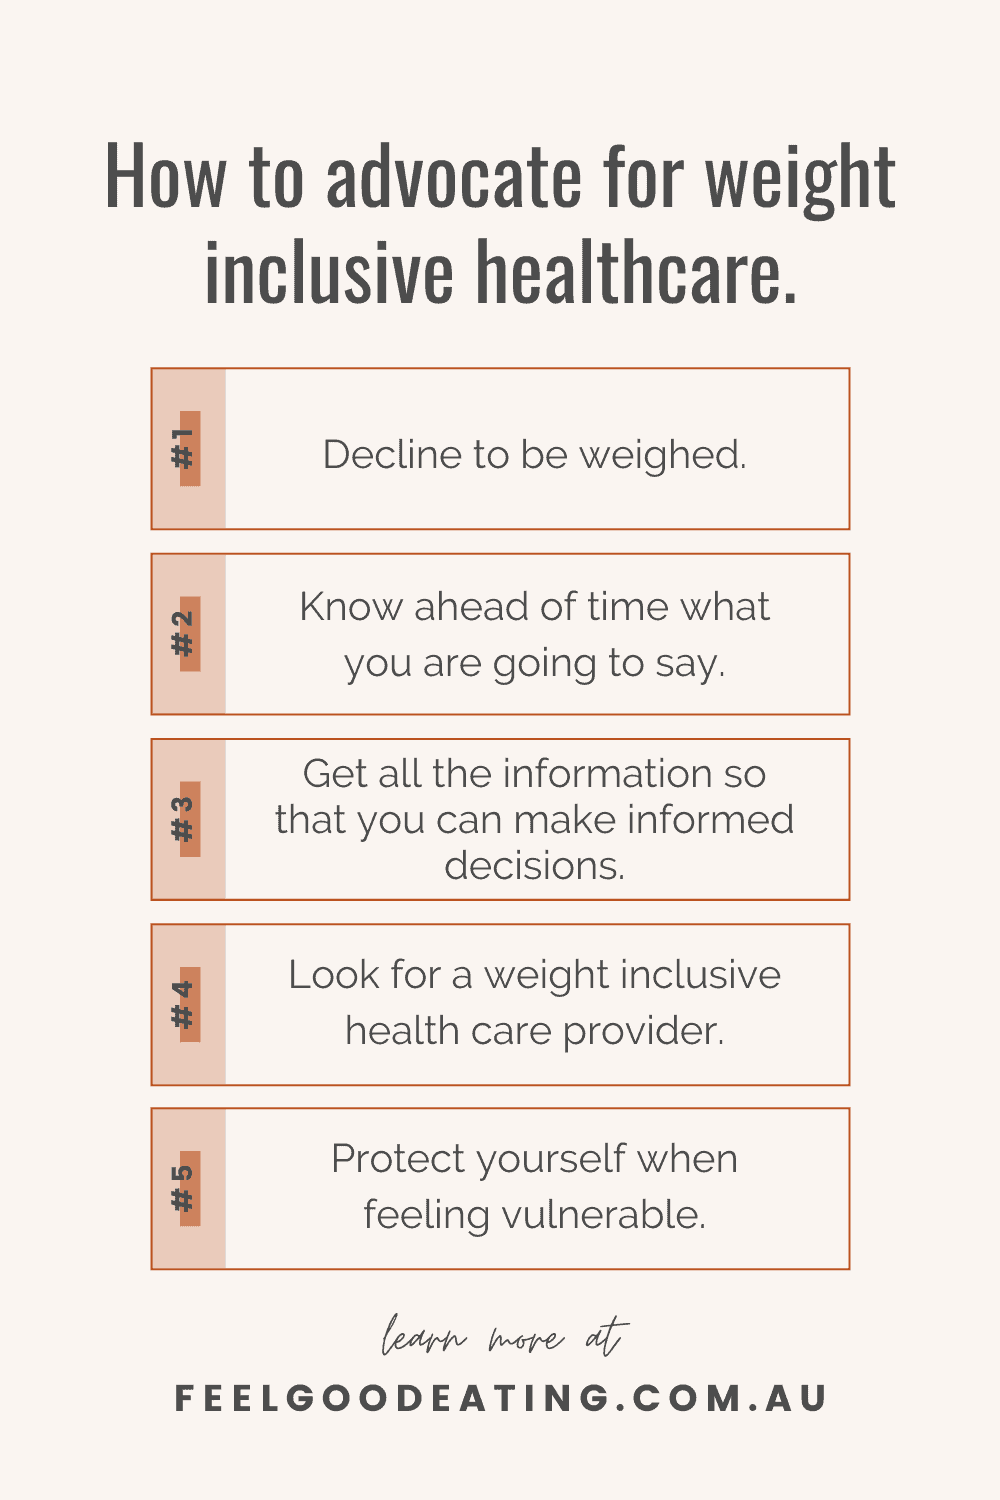 Checklist of how to advocate for weight inclusive healthcare.